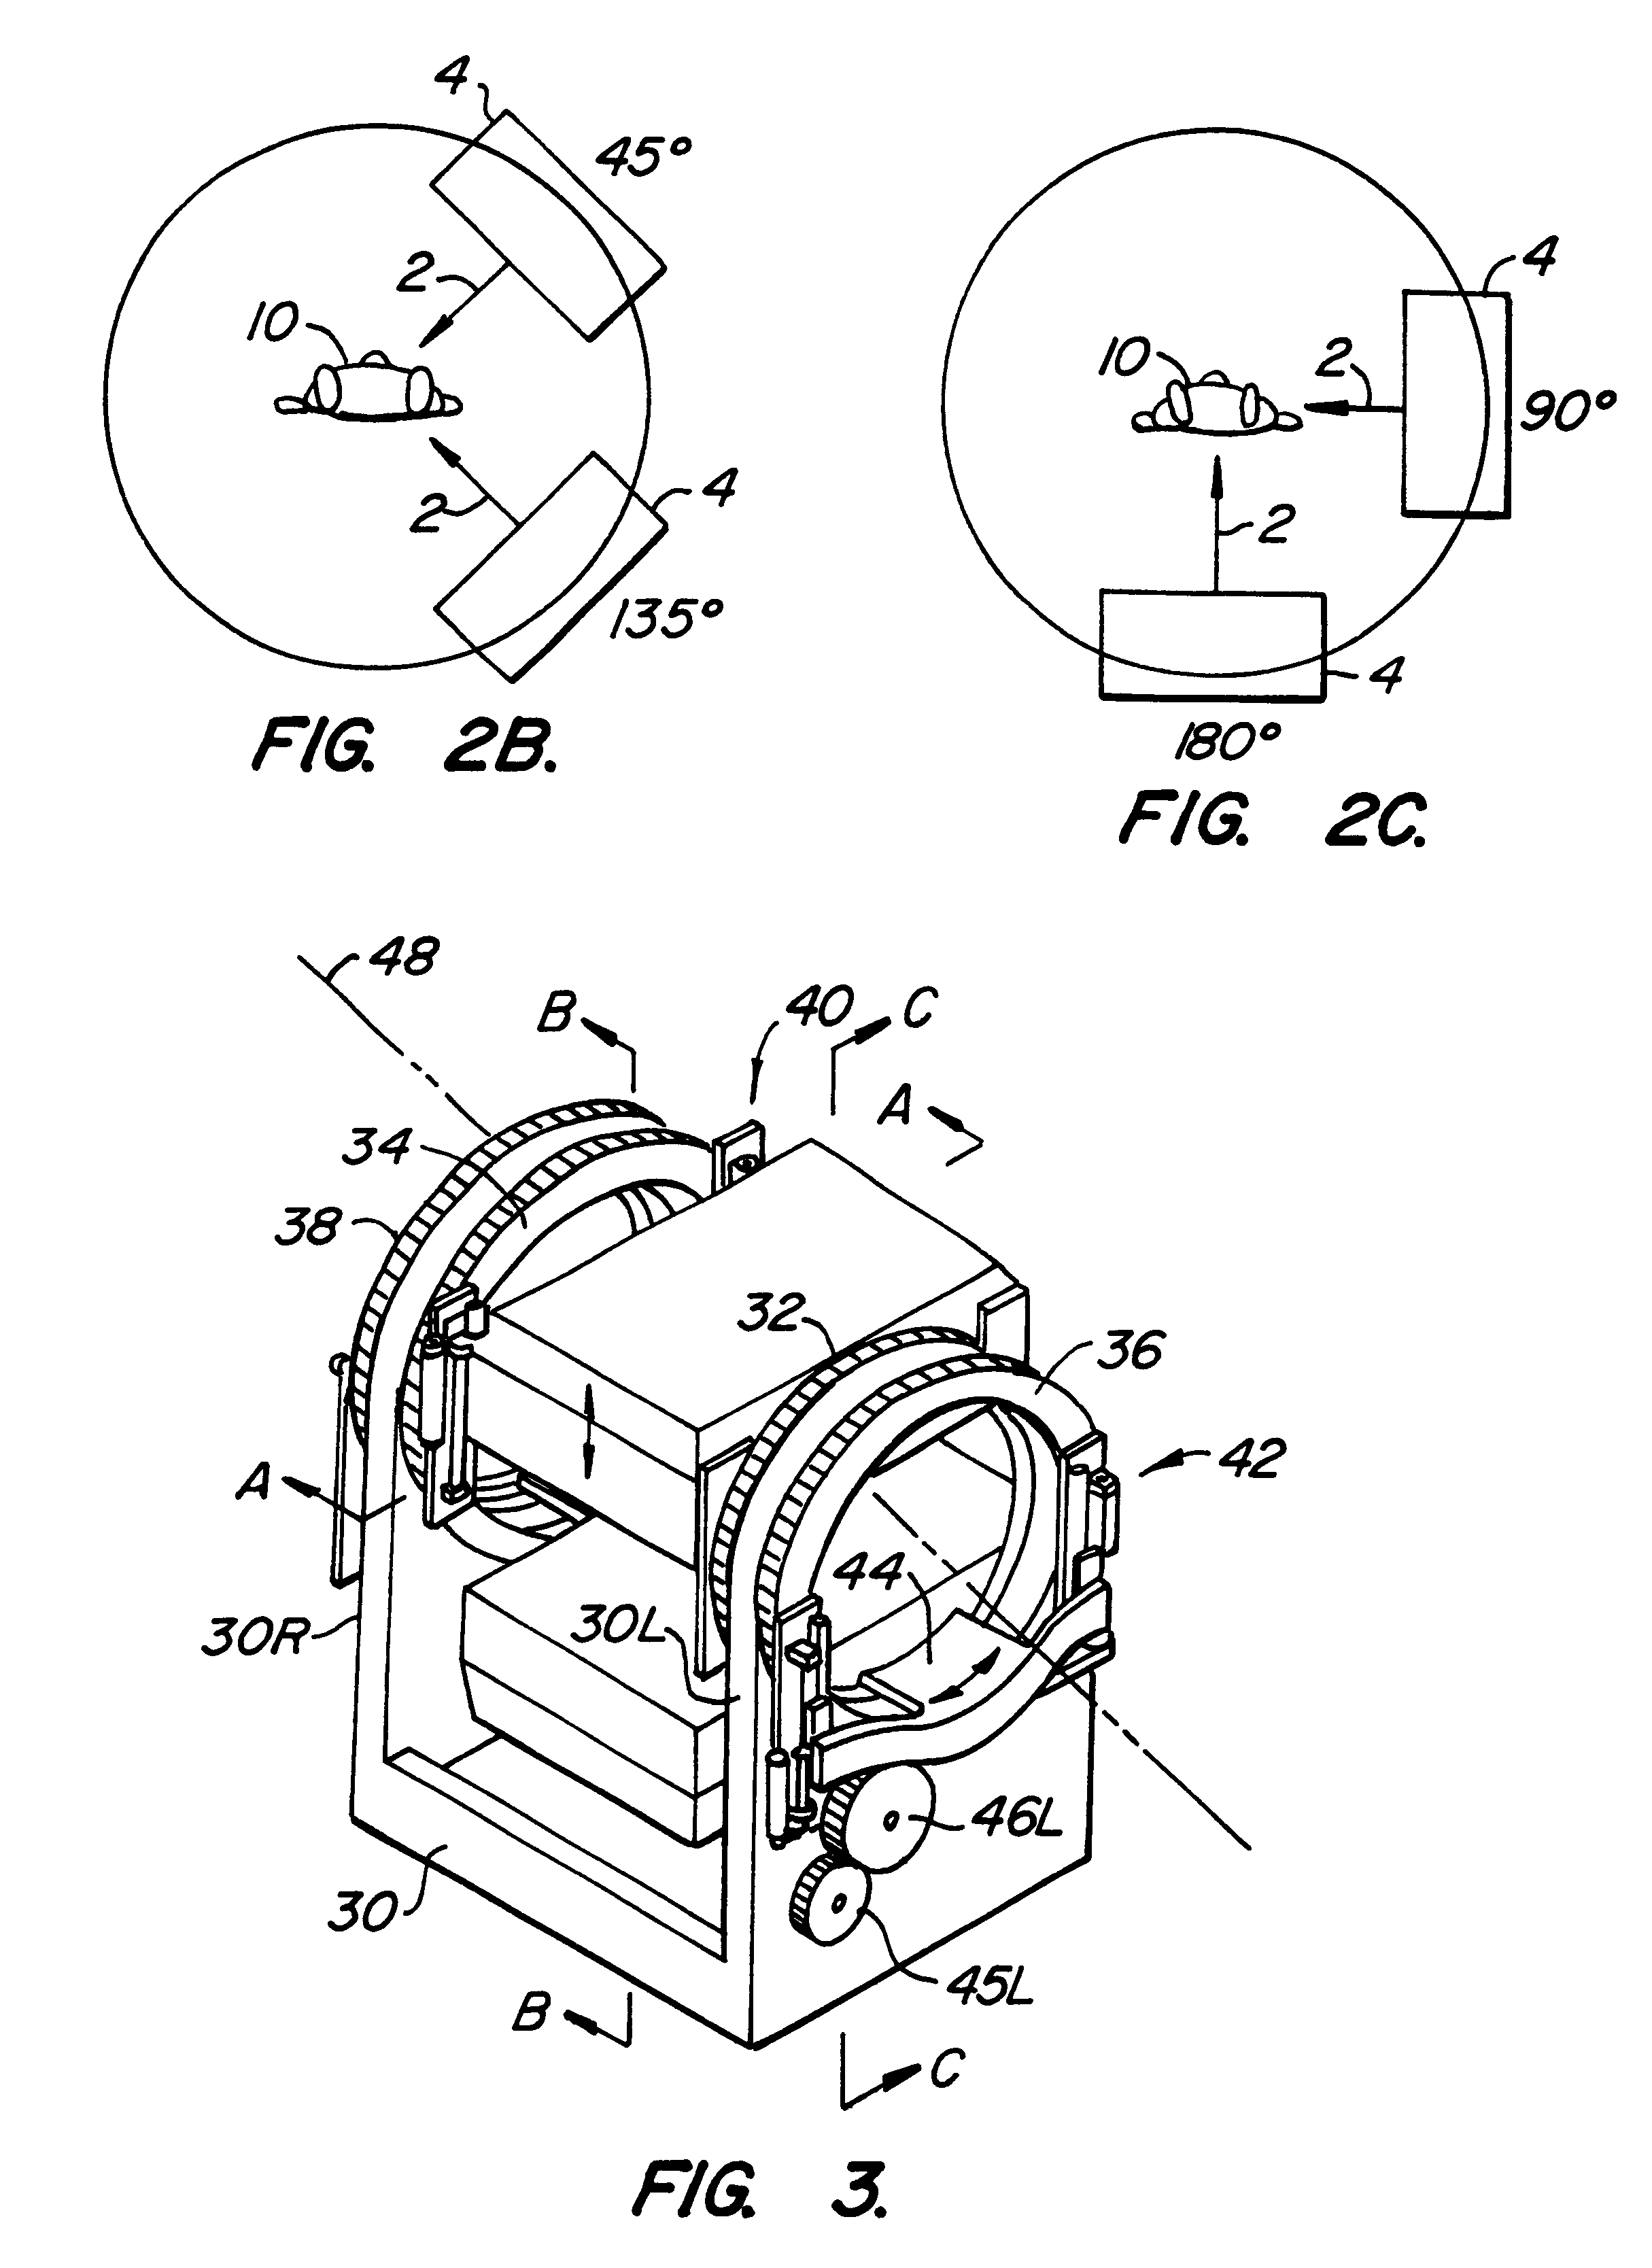 Adjustable dual-detector image data acquisition system